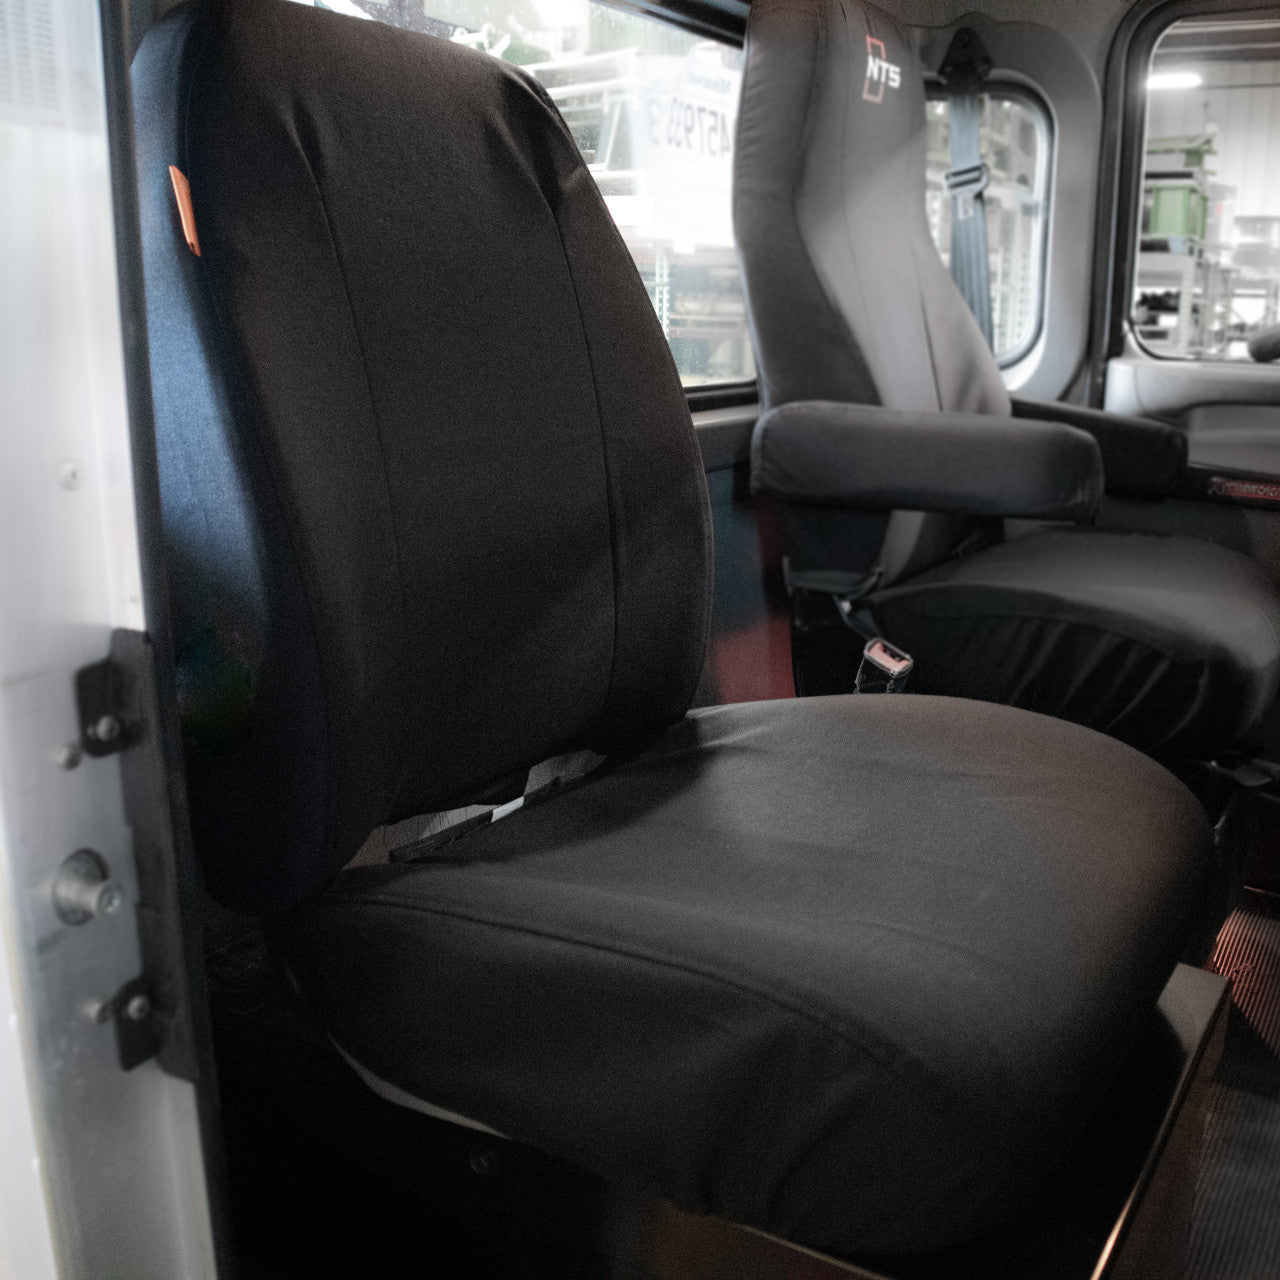 Kenworth passenger seat with TigerTough seat cover in black IronWeave